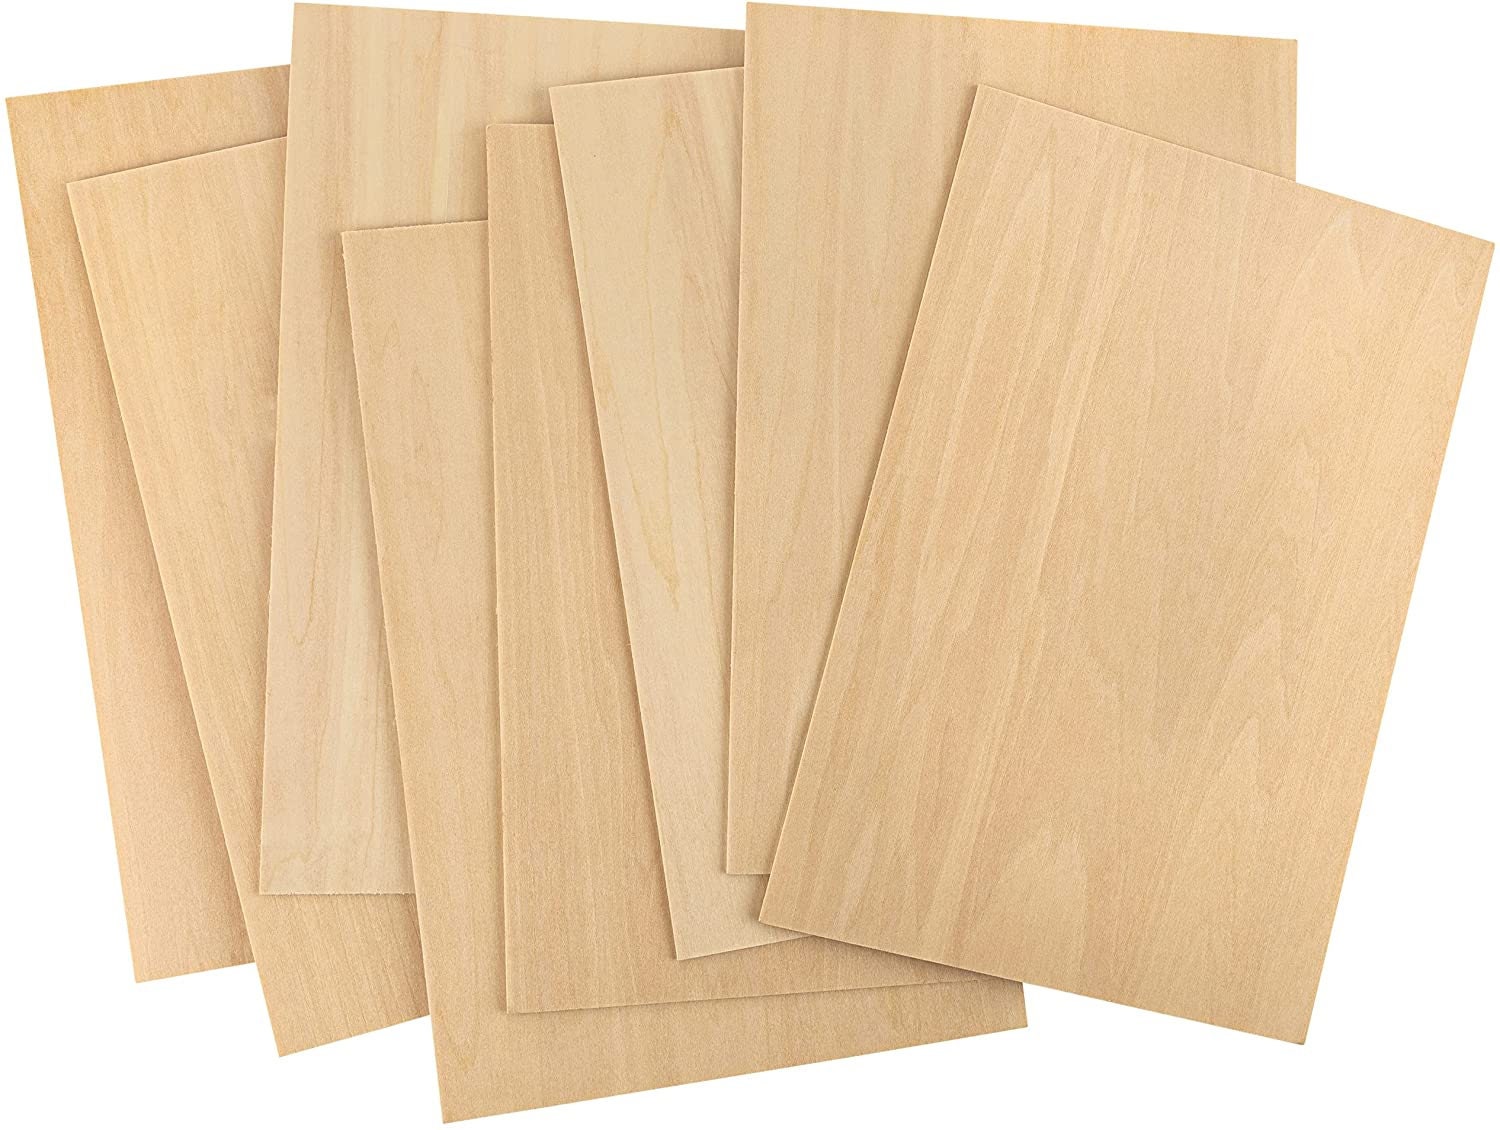 xTool Selected Basswood Plywood 18 PCS, 1/8 Thin Wood Sheets 12 x 12 A/B  Grade Basswood Wood for Crafts, Laser Cutting & Engraving, Painting